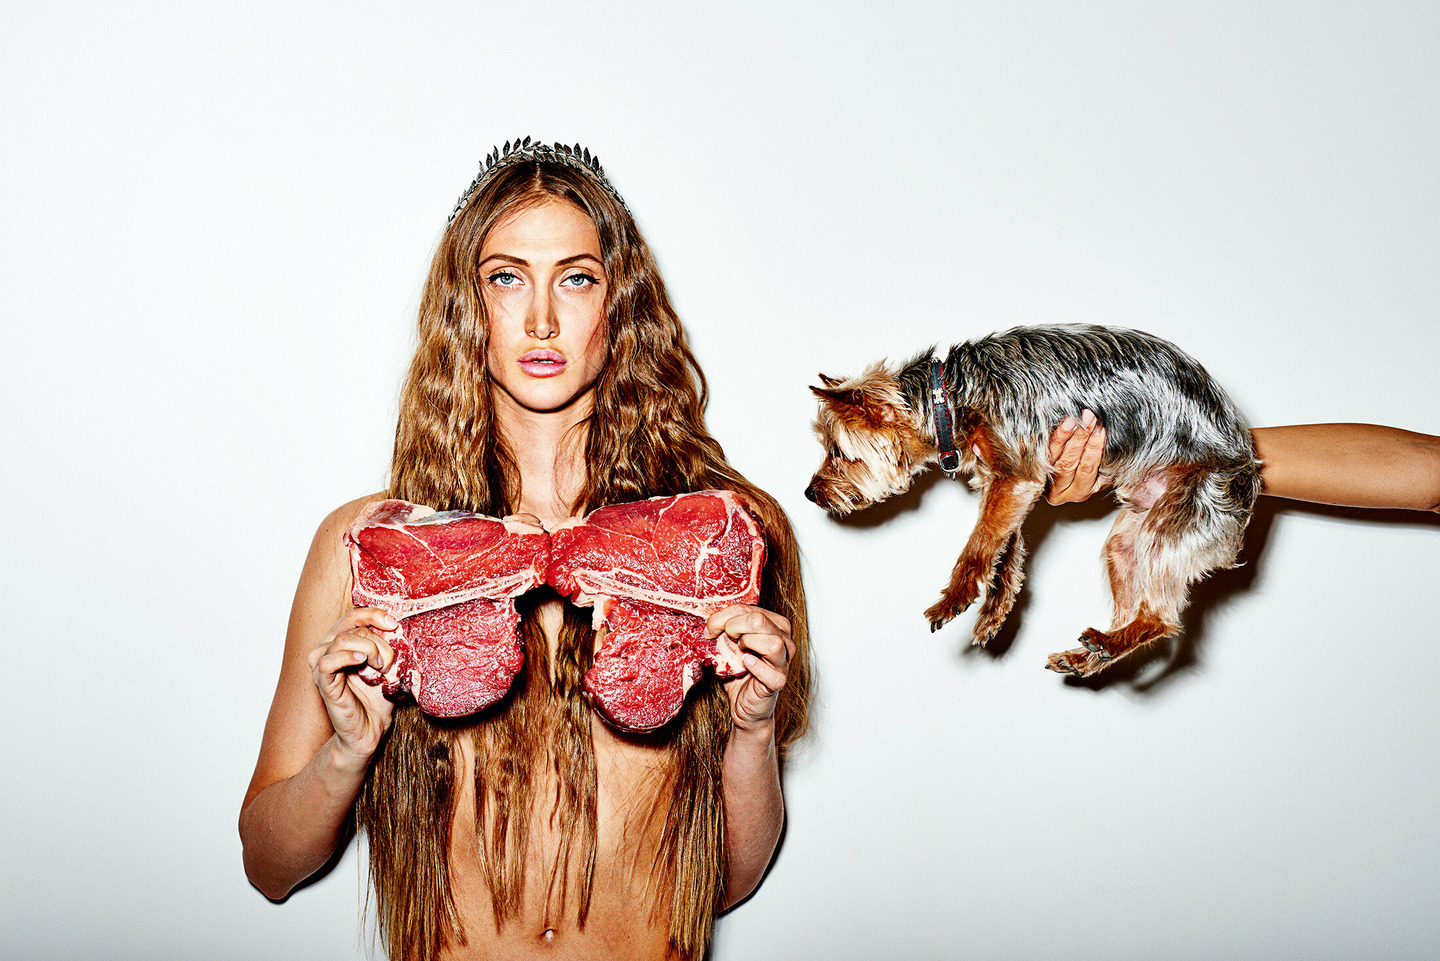 a woman with long hair holding a piece of meat